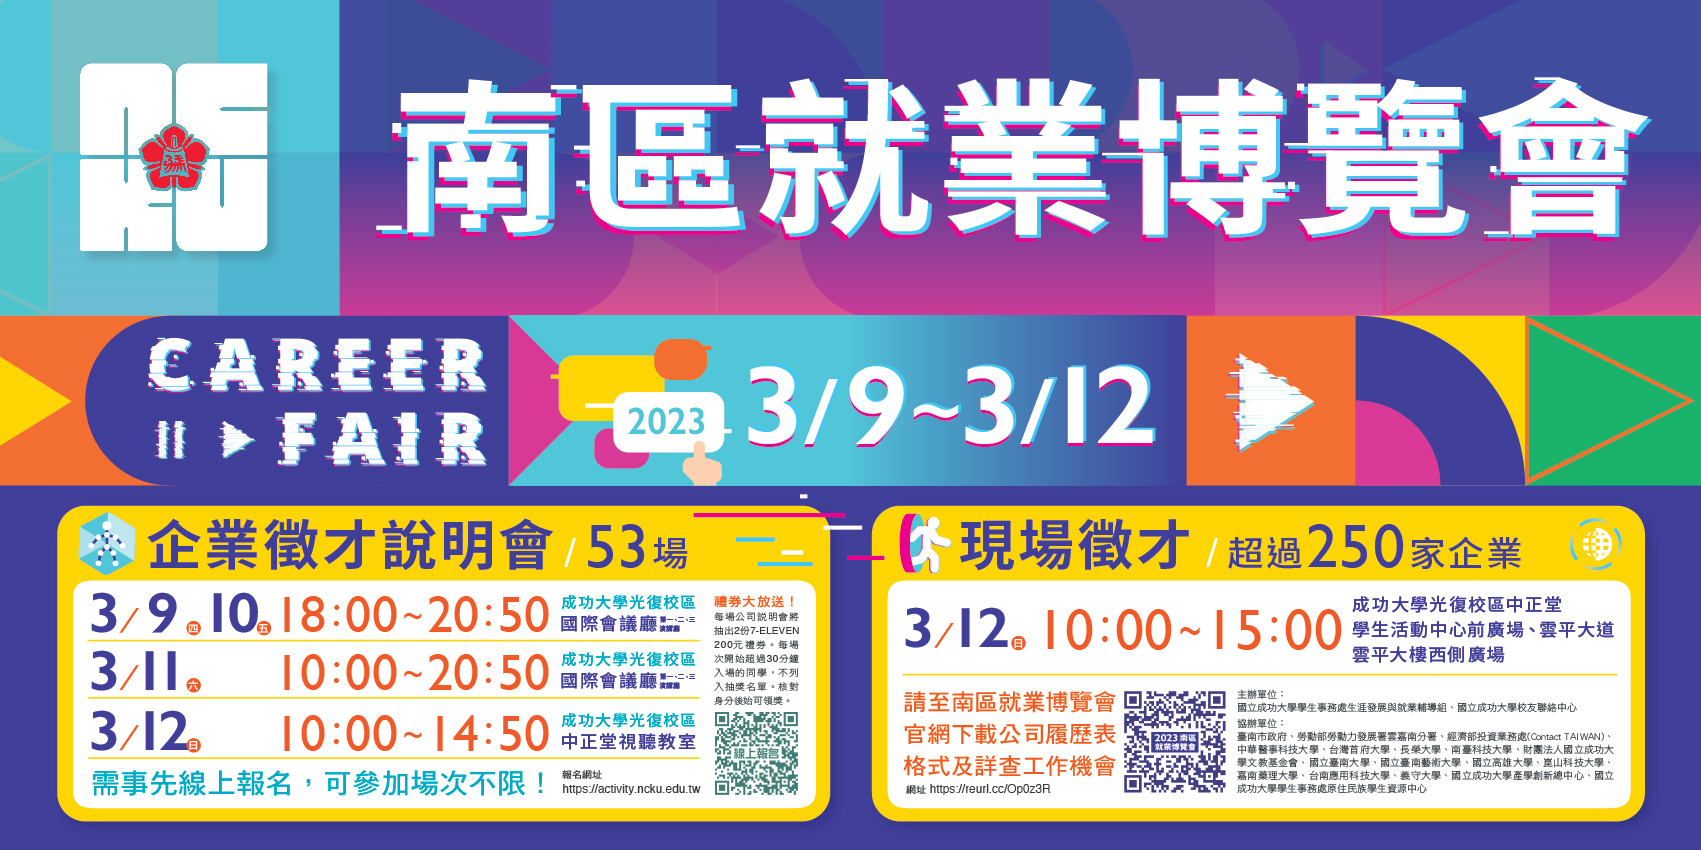 The 2023 Career Fair in Southern Taiwan will take place at NCKU with 14,000 job opportunities available for recruitment.